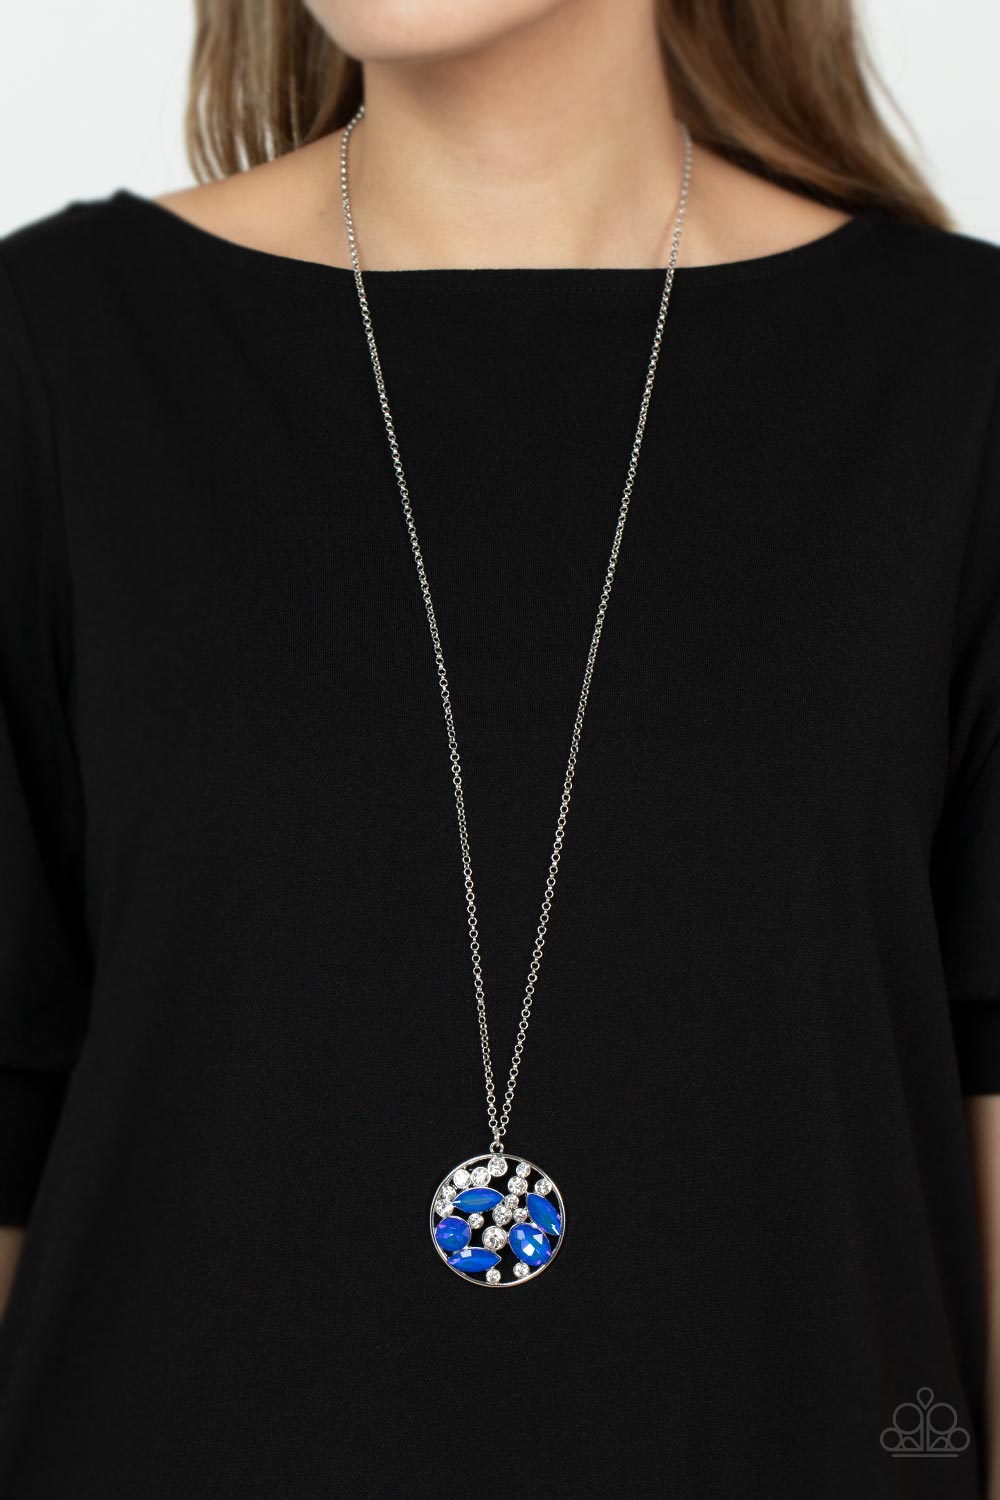 Iridescently Influential - blue - Paparazzi necklace